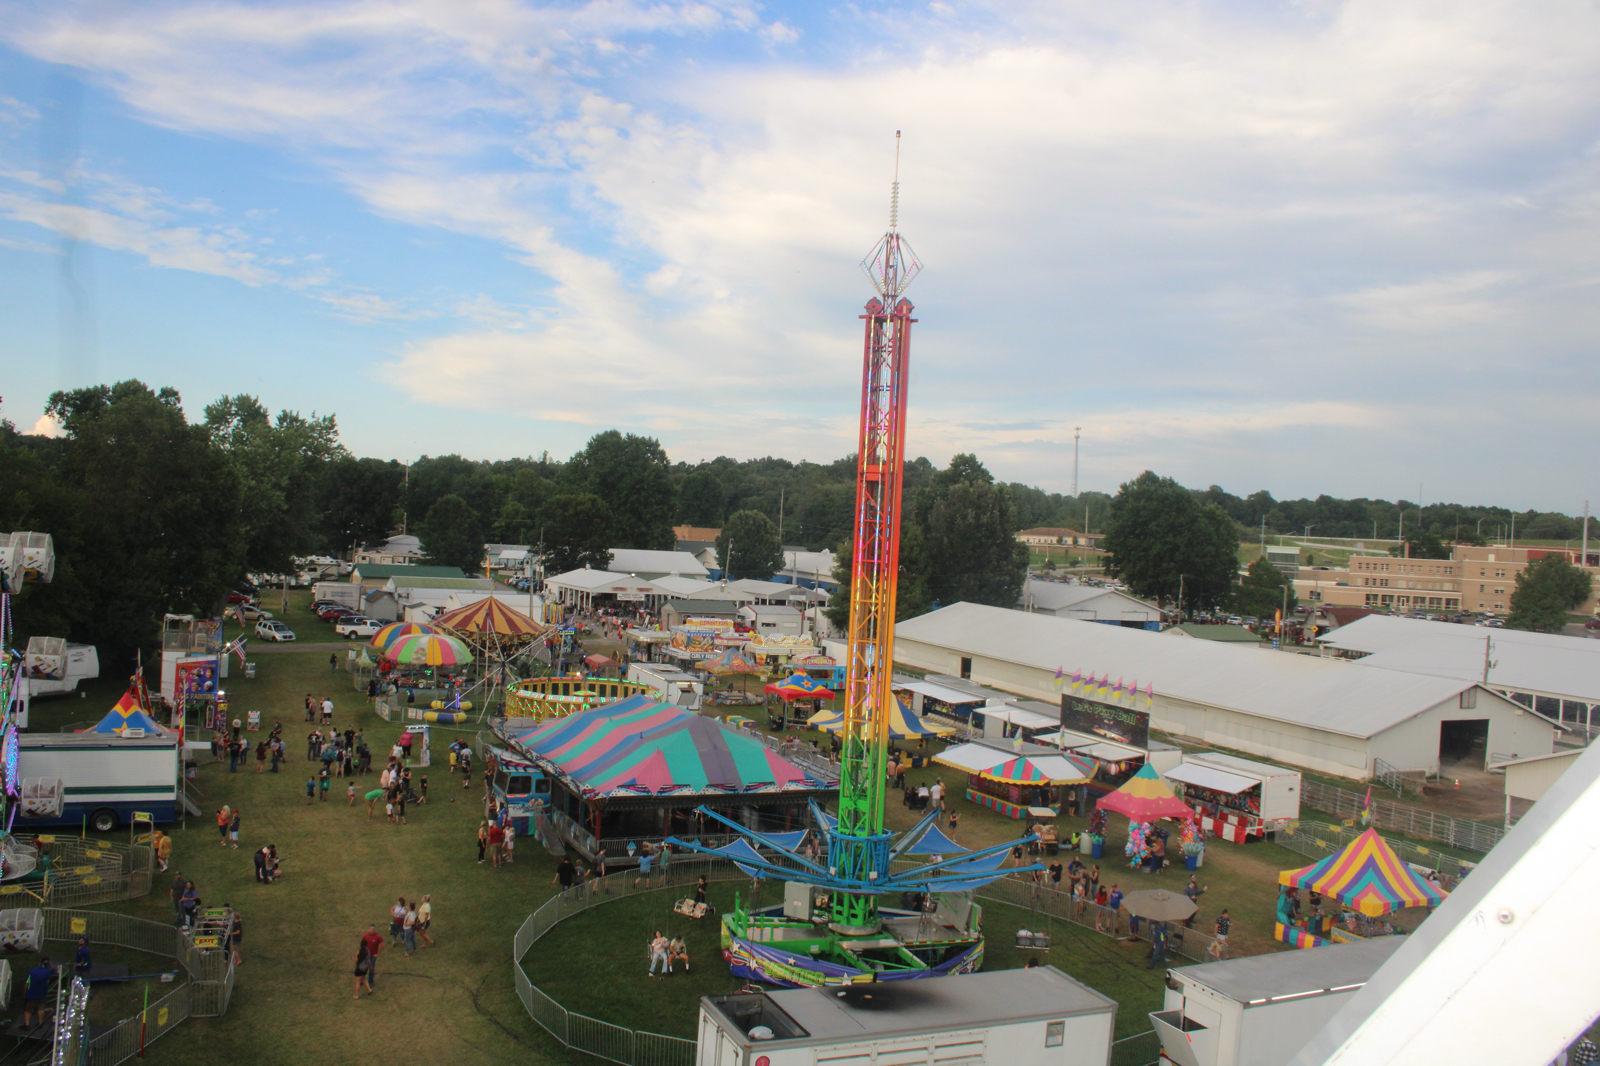 Gallery County Fair Located in Martinsville, IN